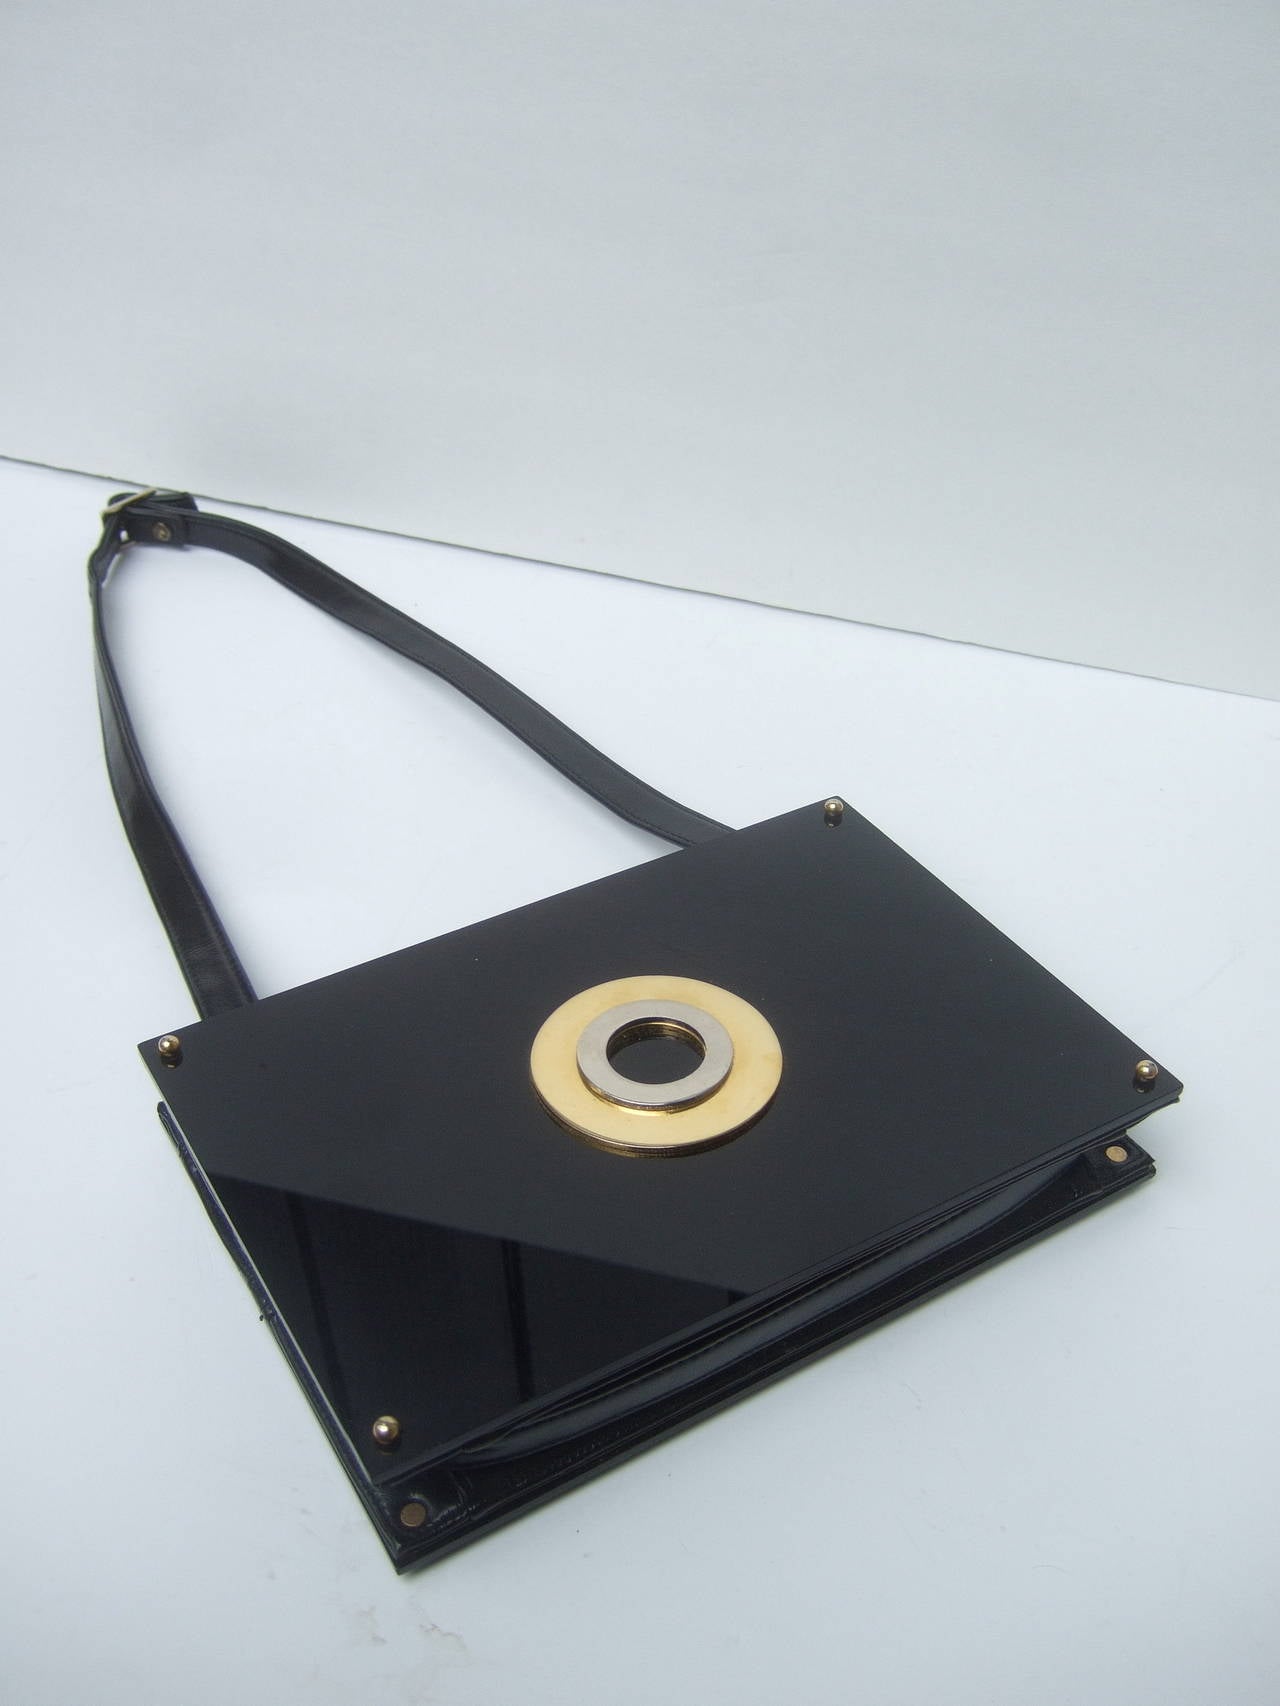 Sleek black lucite clutch style shoulder bag c 1970
The mod retro handbag is designed with two rectangular
black lucite panels on the front & back exterior

The versatile design can be carried as a chic clutch 
bag by removing the black vinyl